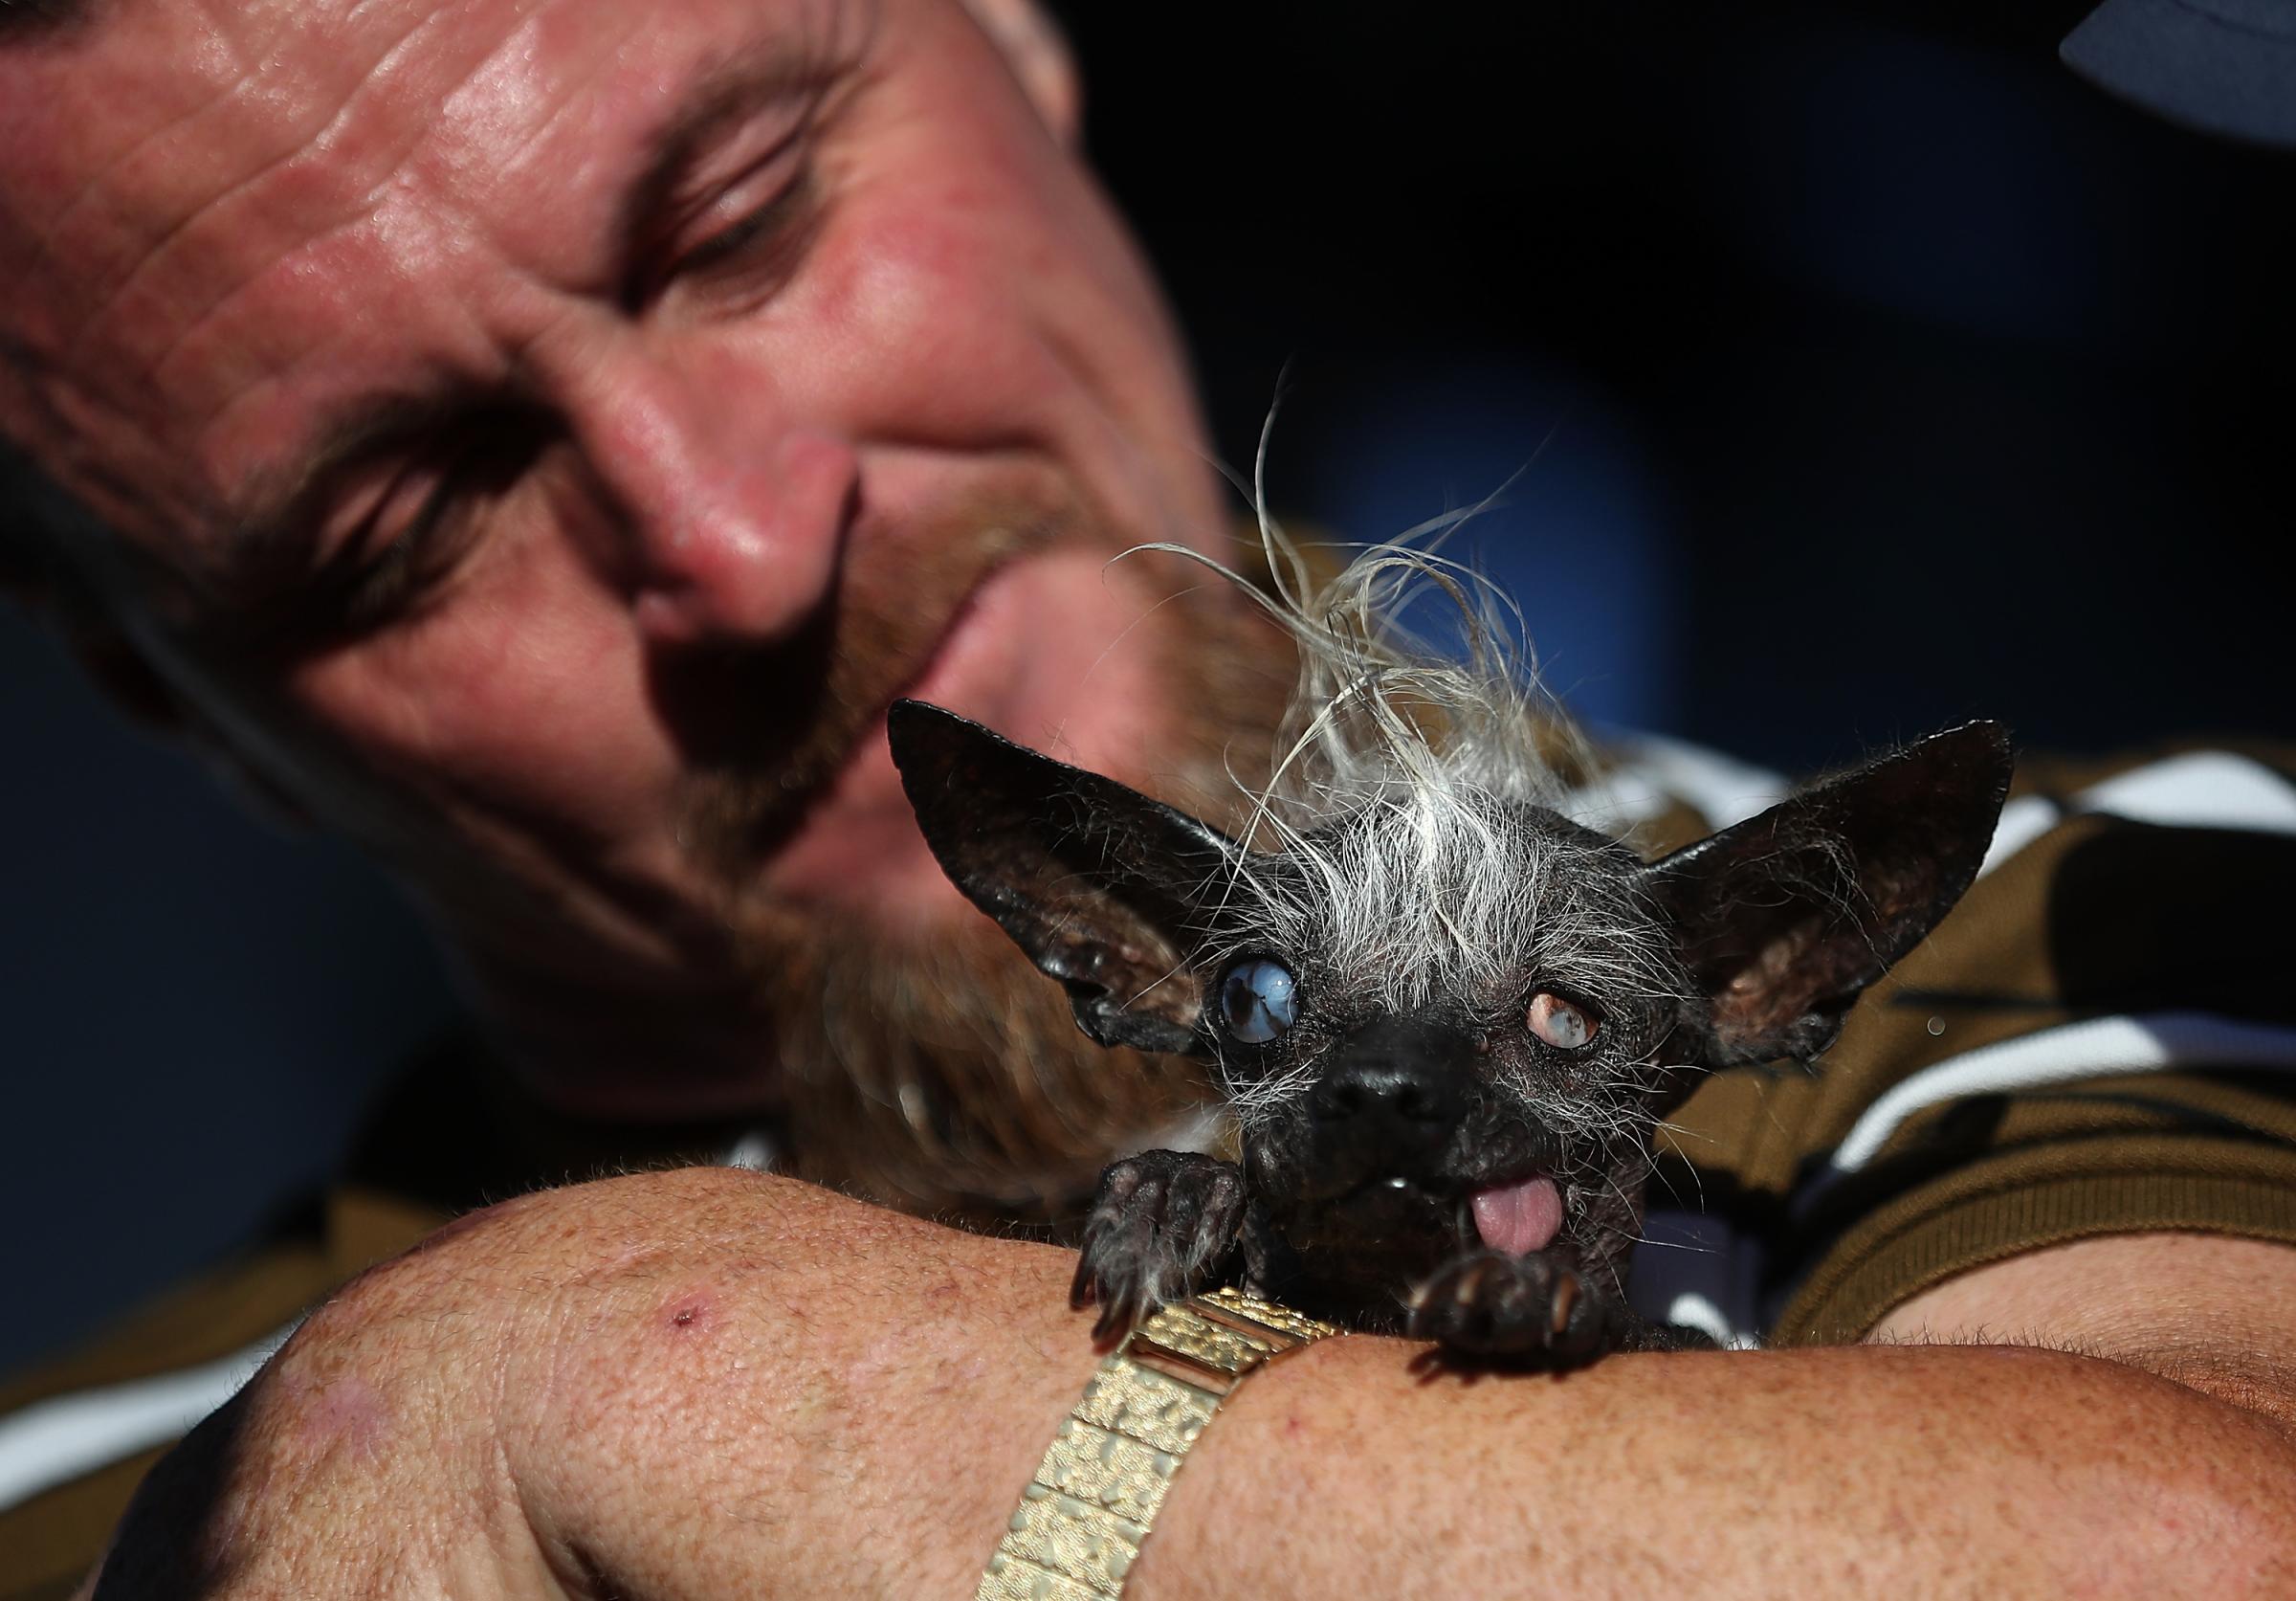 Jason Wurtz of Van Nuys, Calif., holds his dog Sweepee Rambo after winning the 2016 World's Ugliest Dog contest at the Sonoma-Marin Fair in Petaluma, Calif., on June 24, 2016.